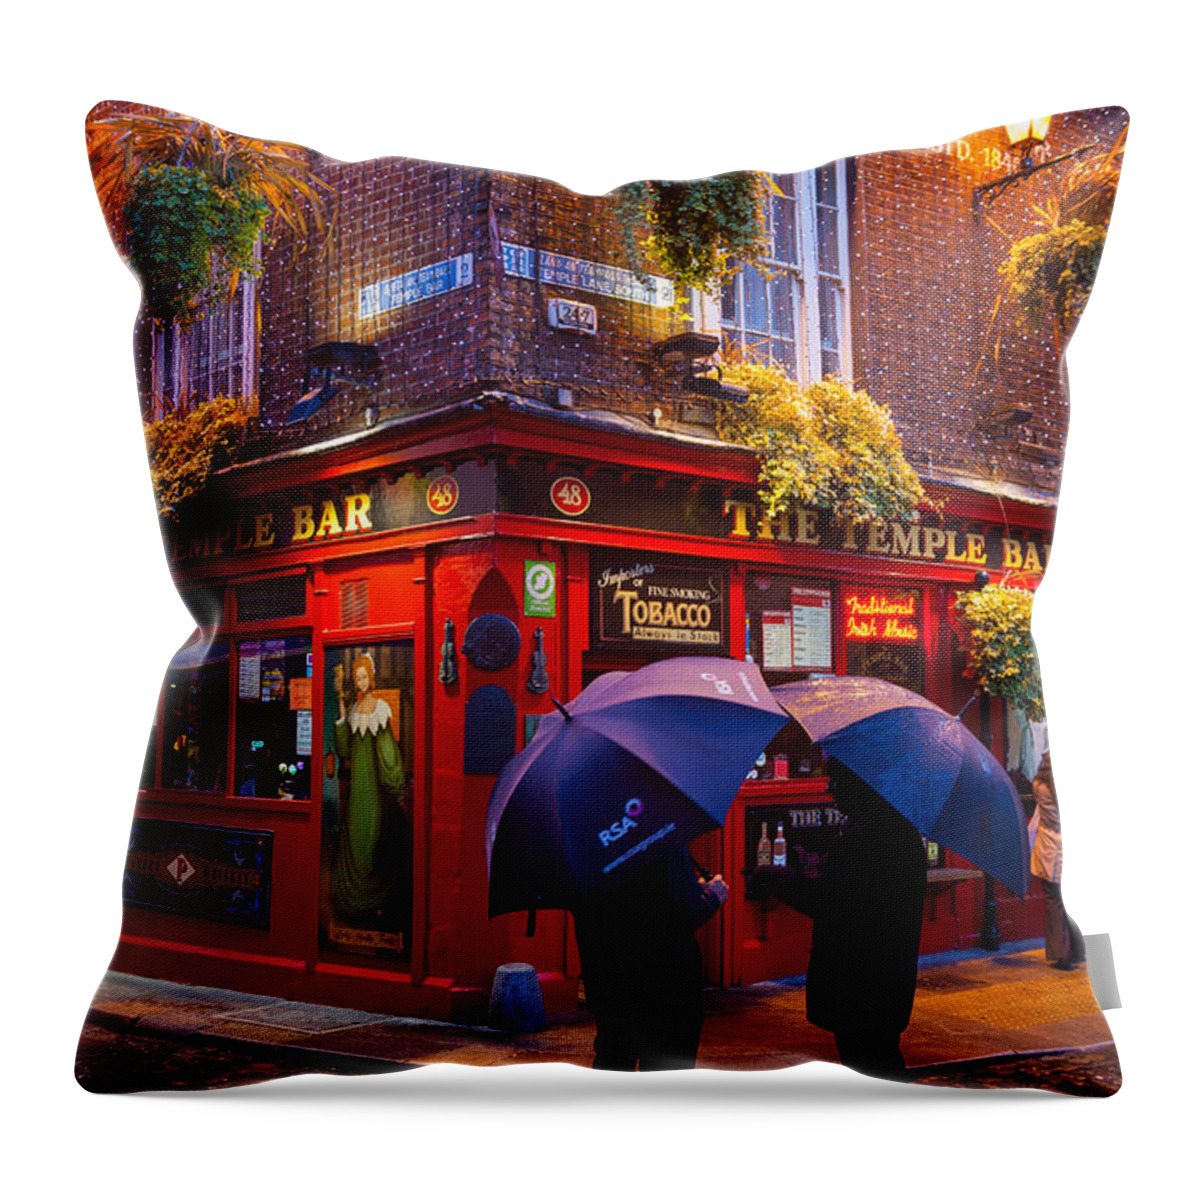 Dublin Throw Pillow featuring the photograph Temple Bar by Inge Johnsson